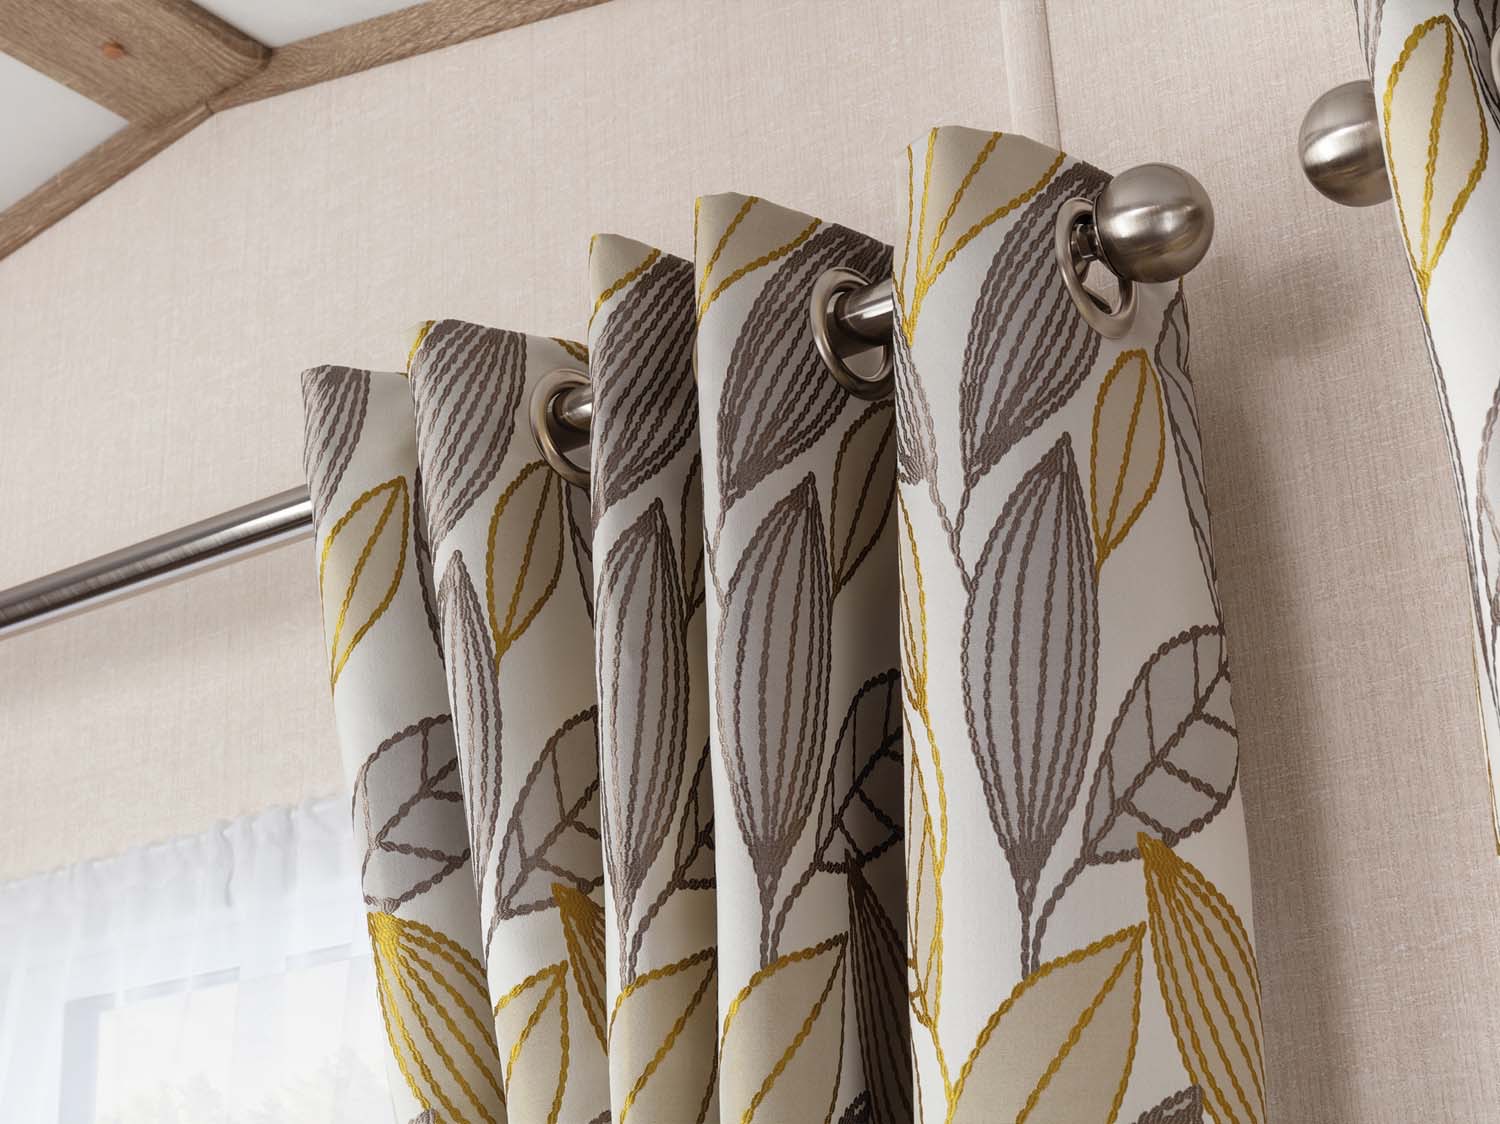 2019 Oakdale Close Up Curtains